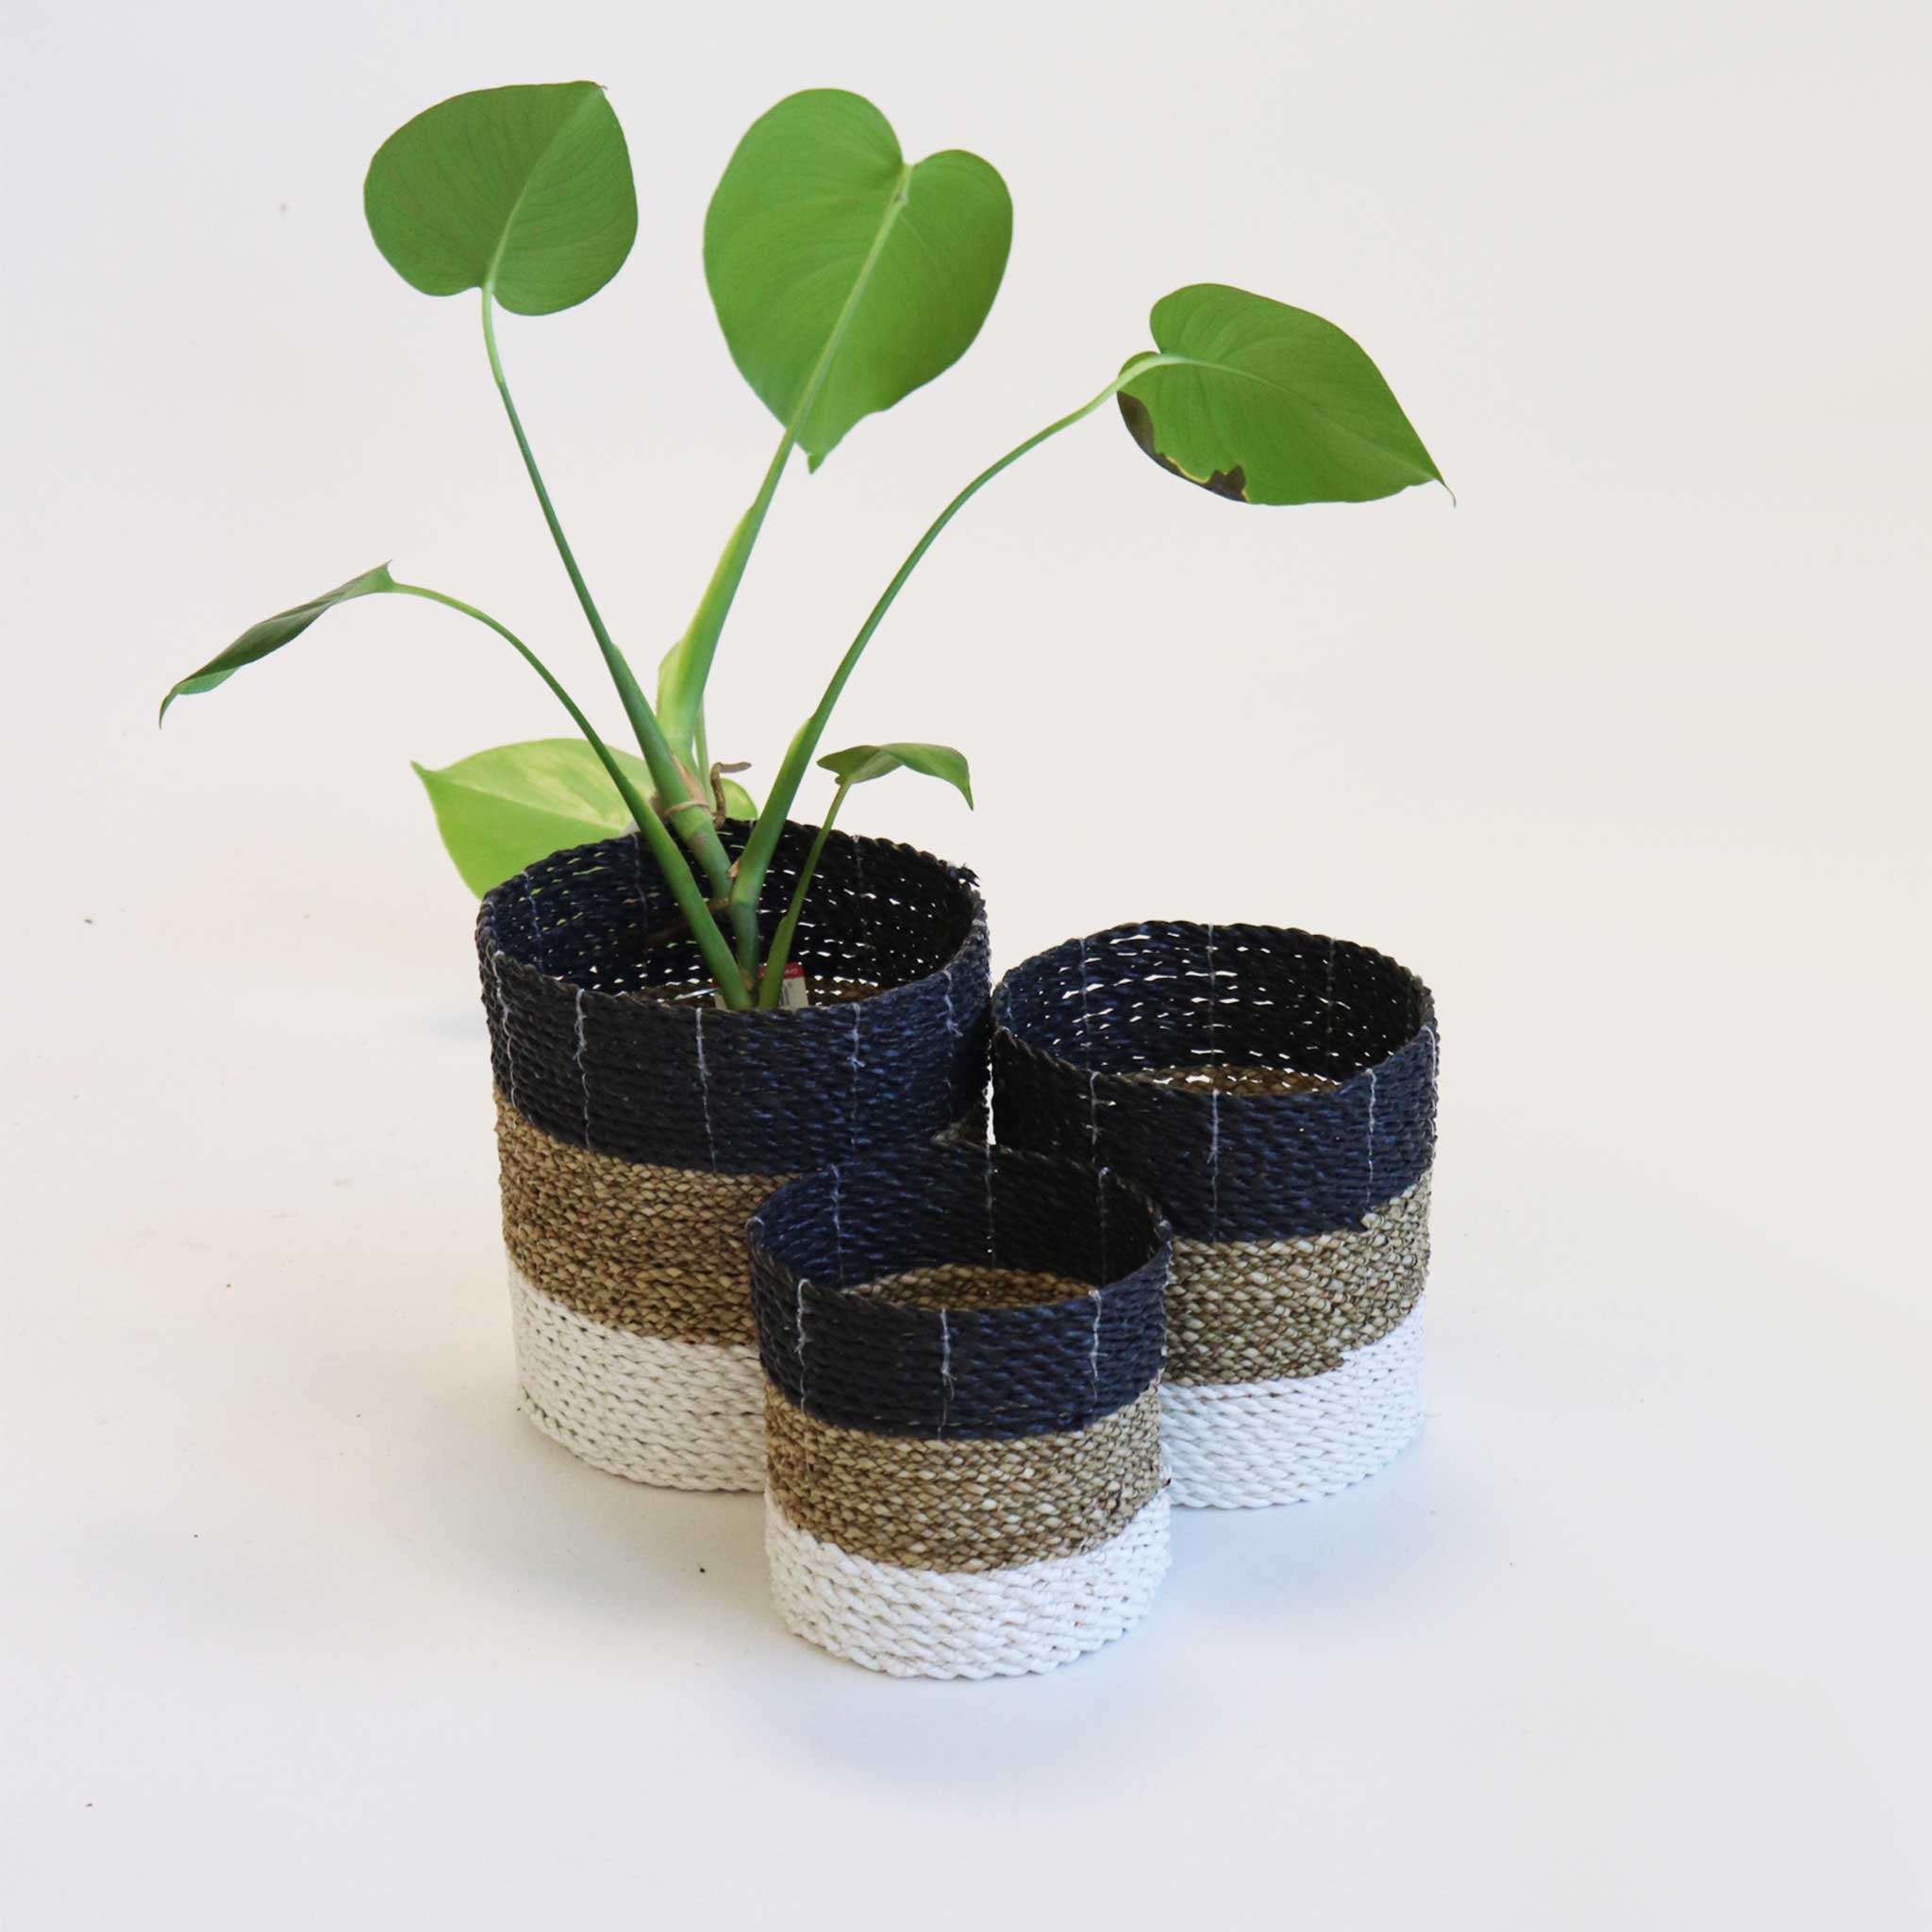 Small Black, Natural and White Baskets